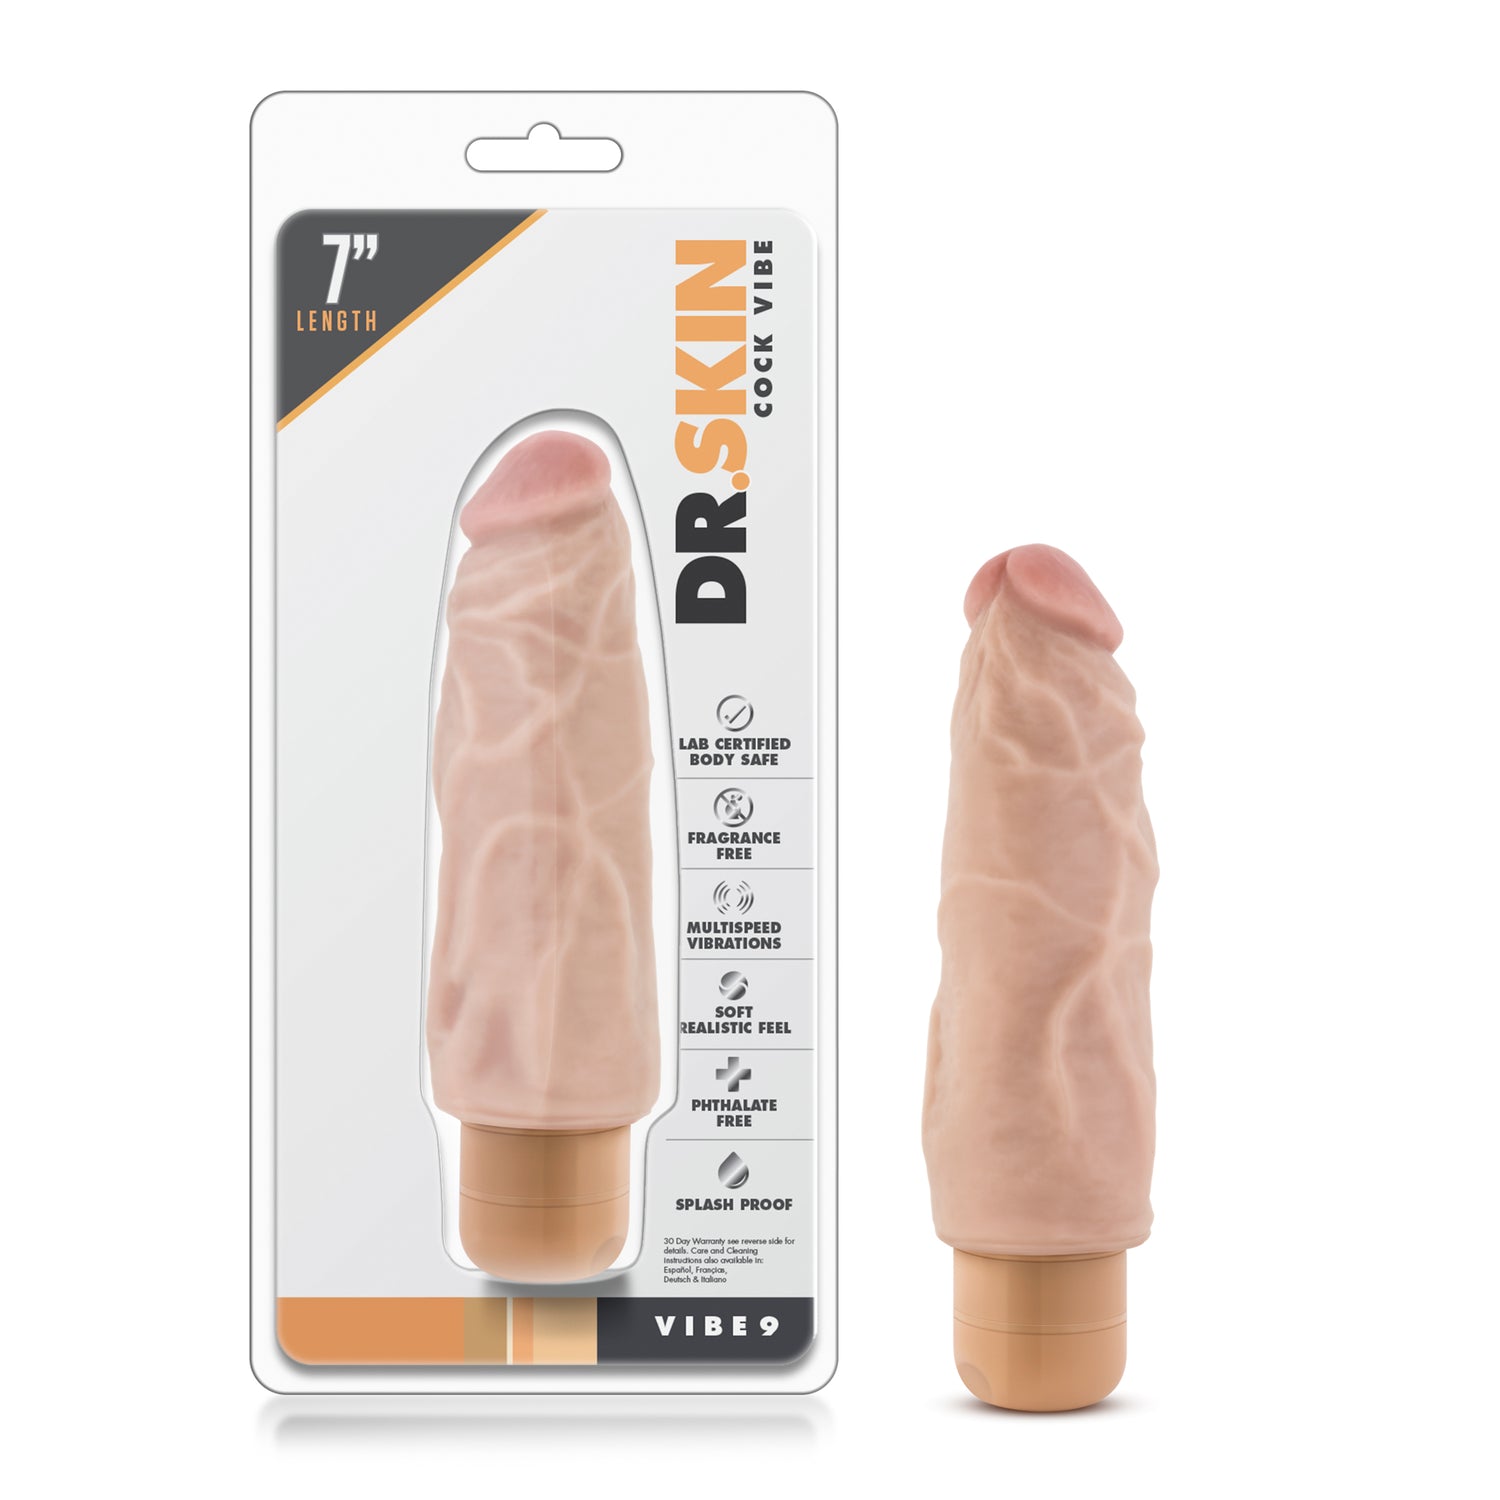 Dr Skin Cock Vibe 9 7.5in Vibrating Cock Beige - Just for you desires